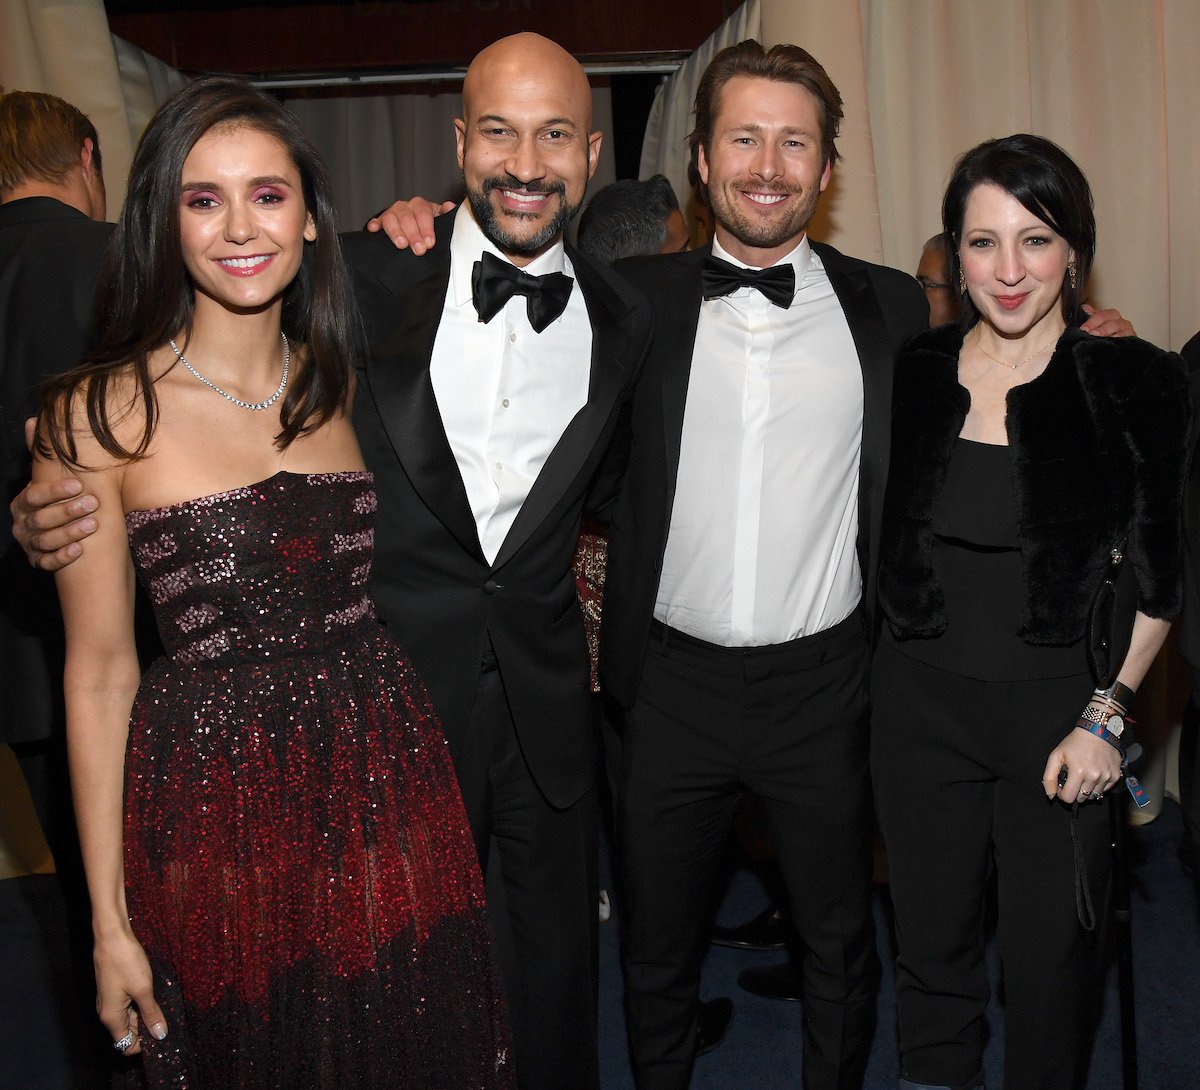 Nina Dobrev, Keegan-Michael Key, Glen Powell, and Elisa Key smile for a photo at the 2020 InStyle Golden Globe Awards Post-Party